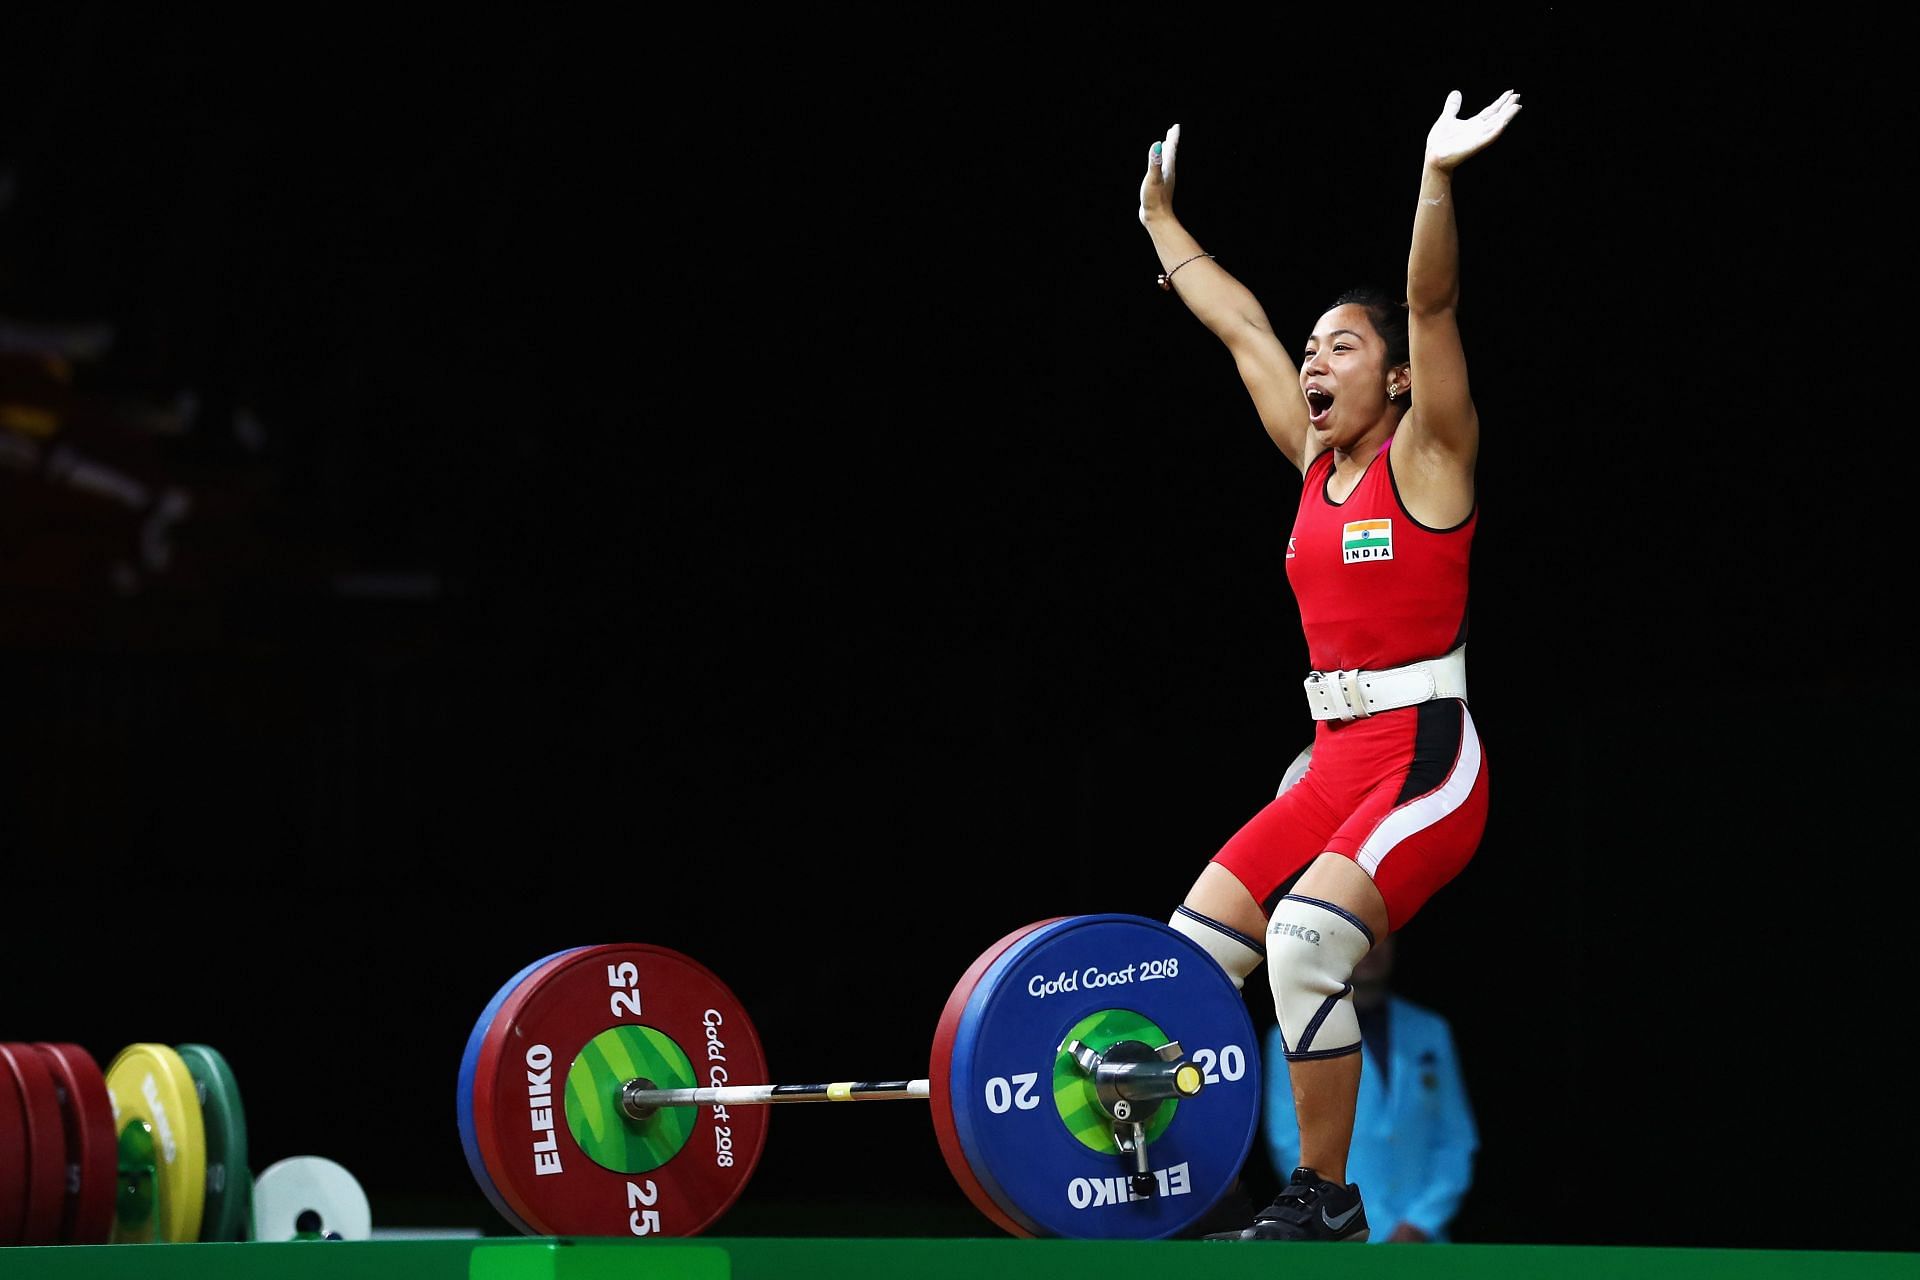 Mirabai Chanu is gearing up for her third Olympic campaign